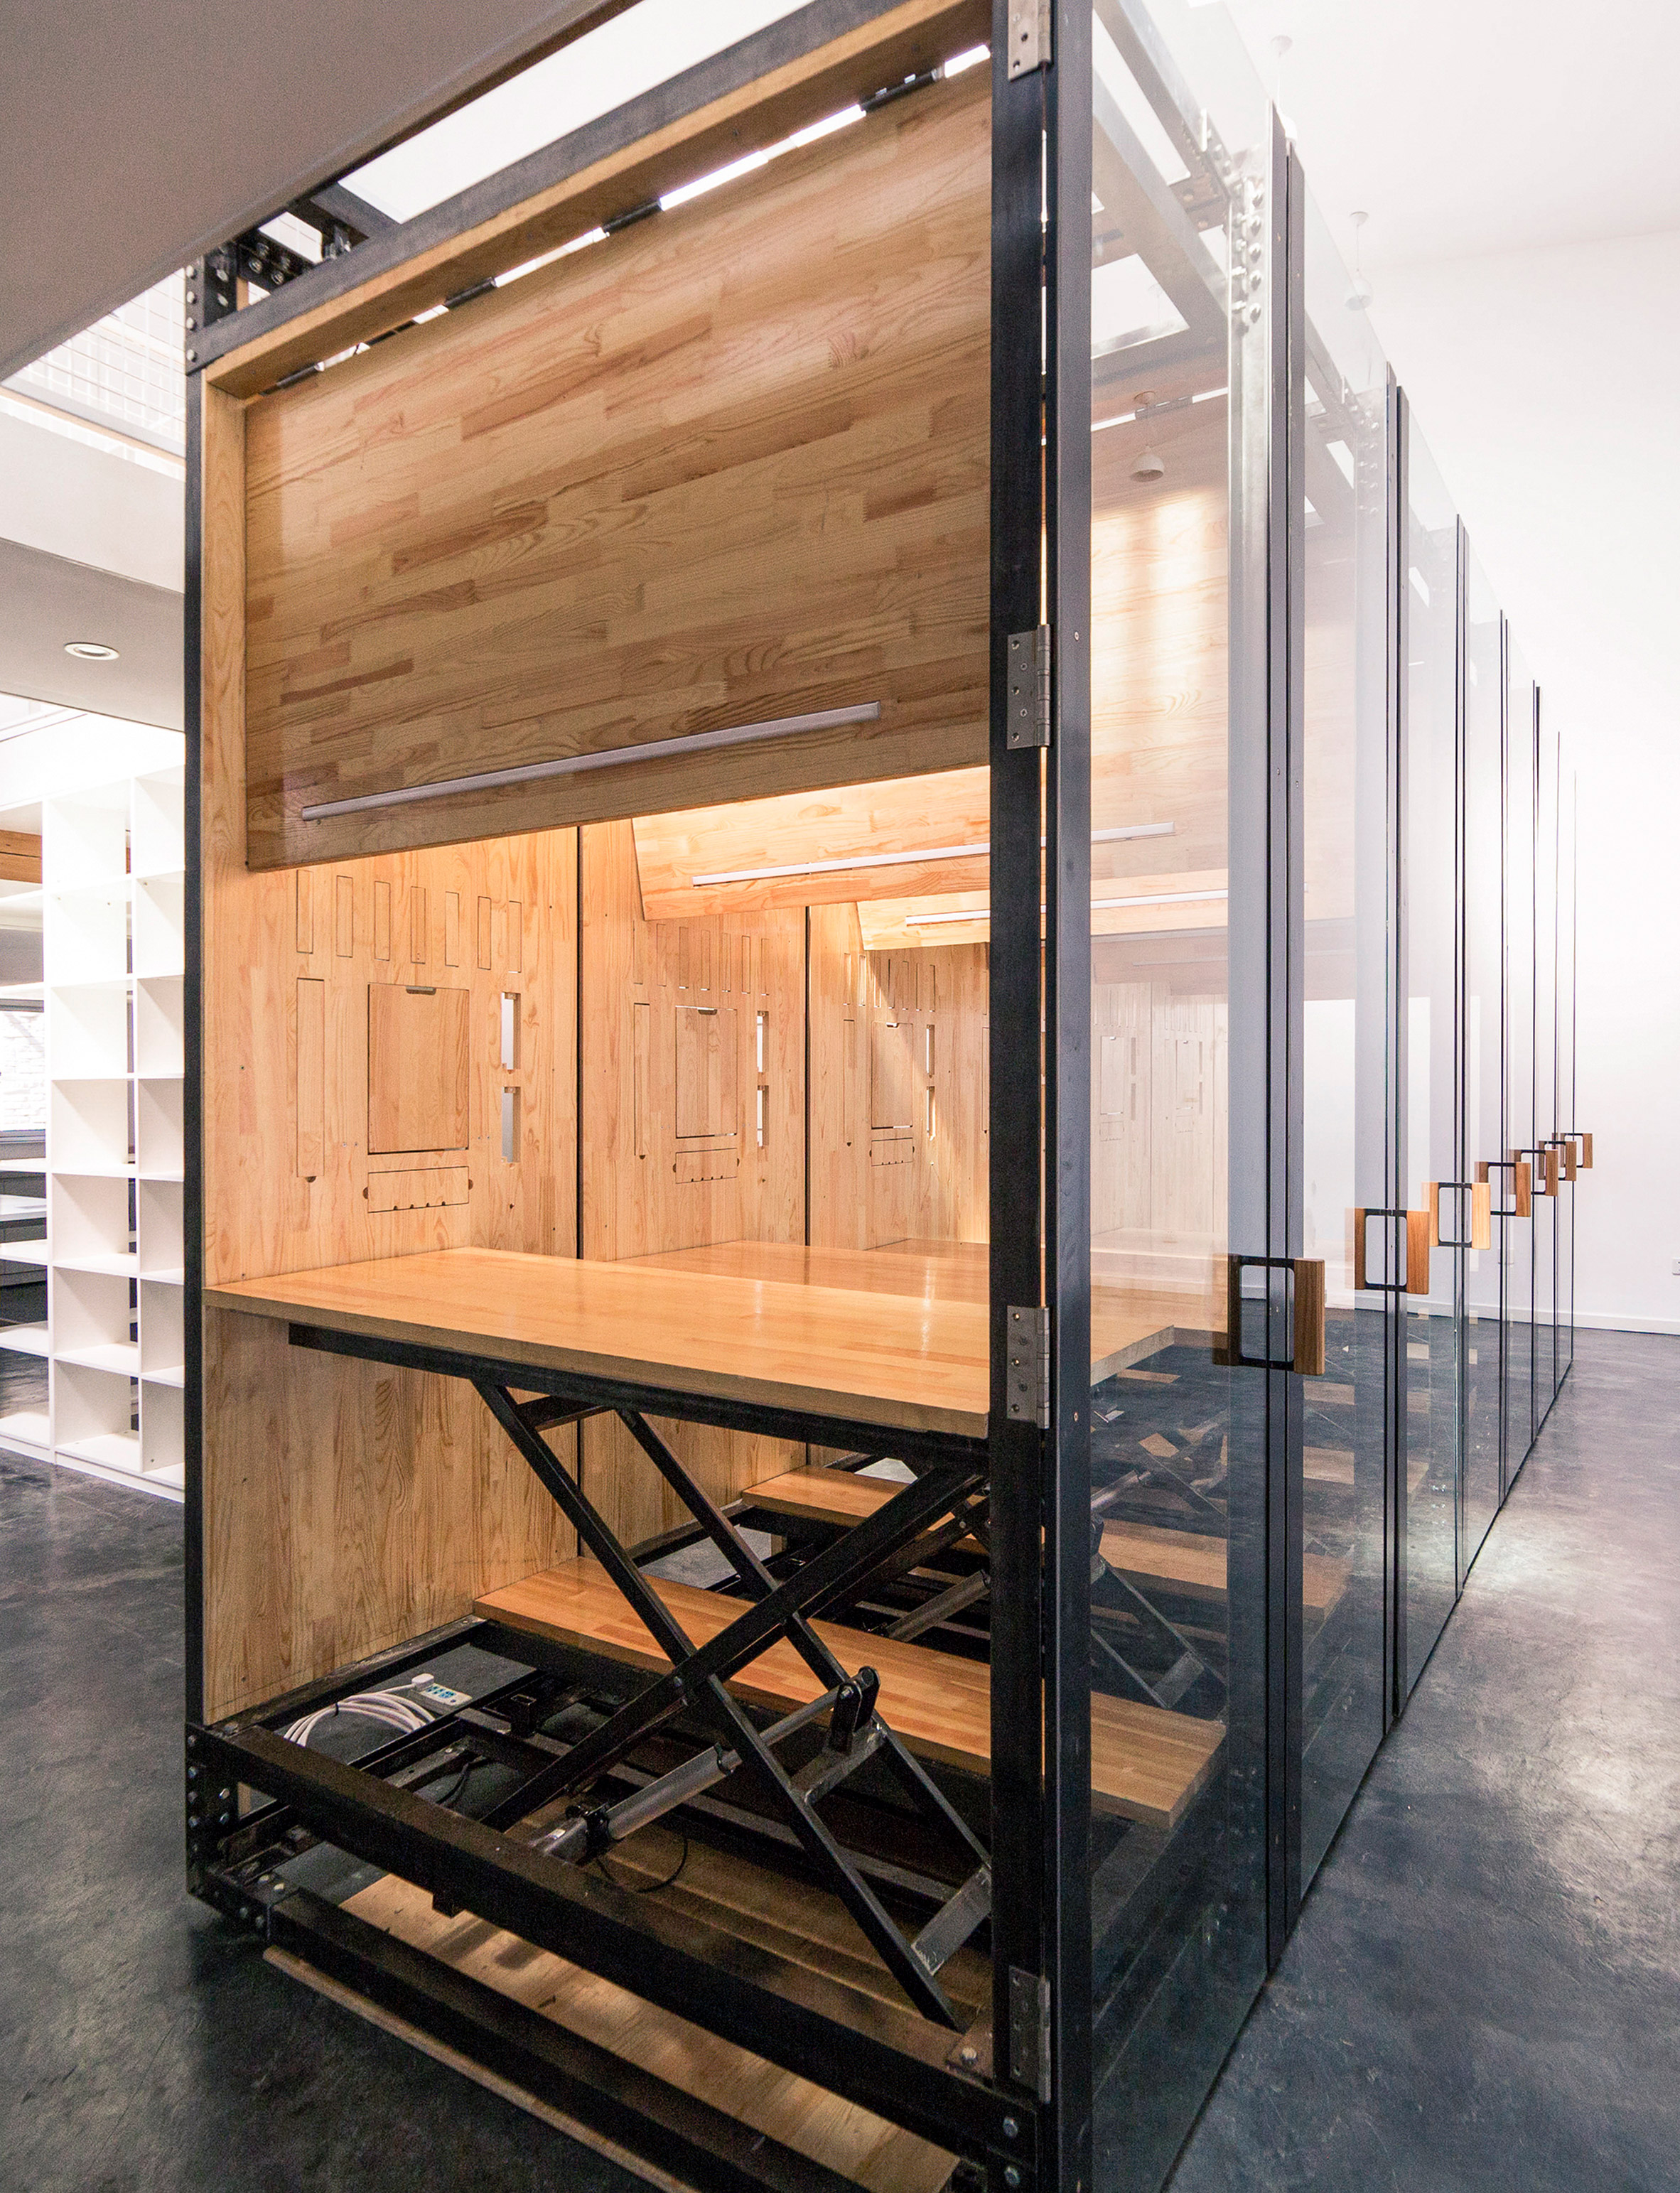 LUO Studio uses retractable desks to turn tiny office into presentation room